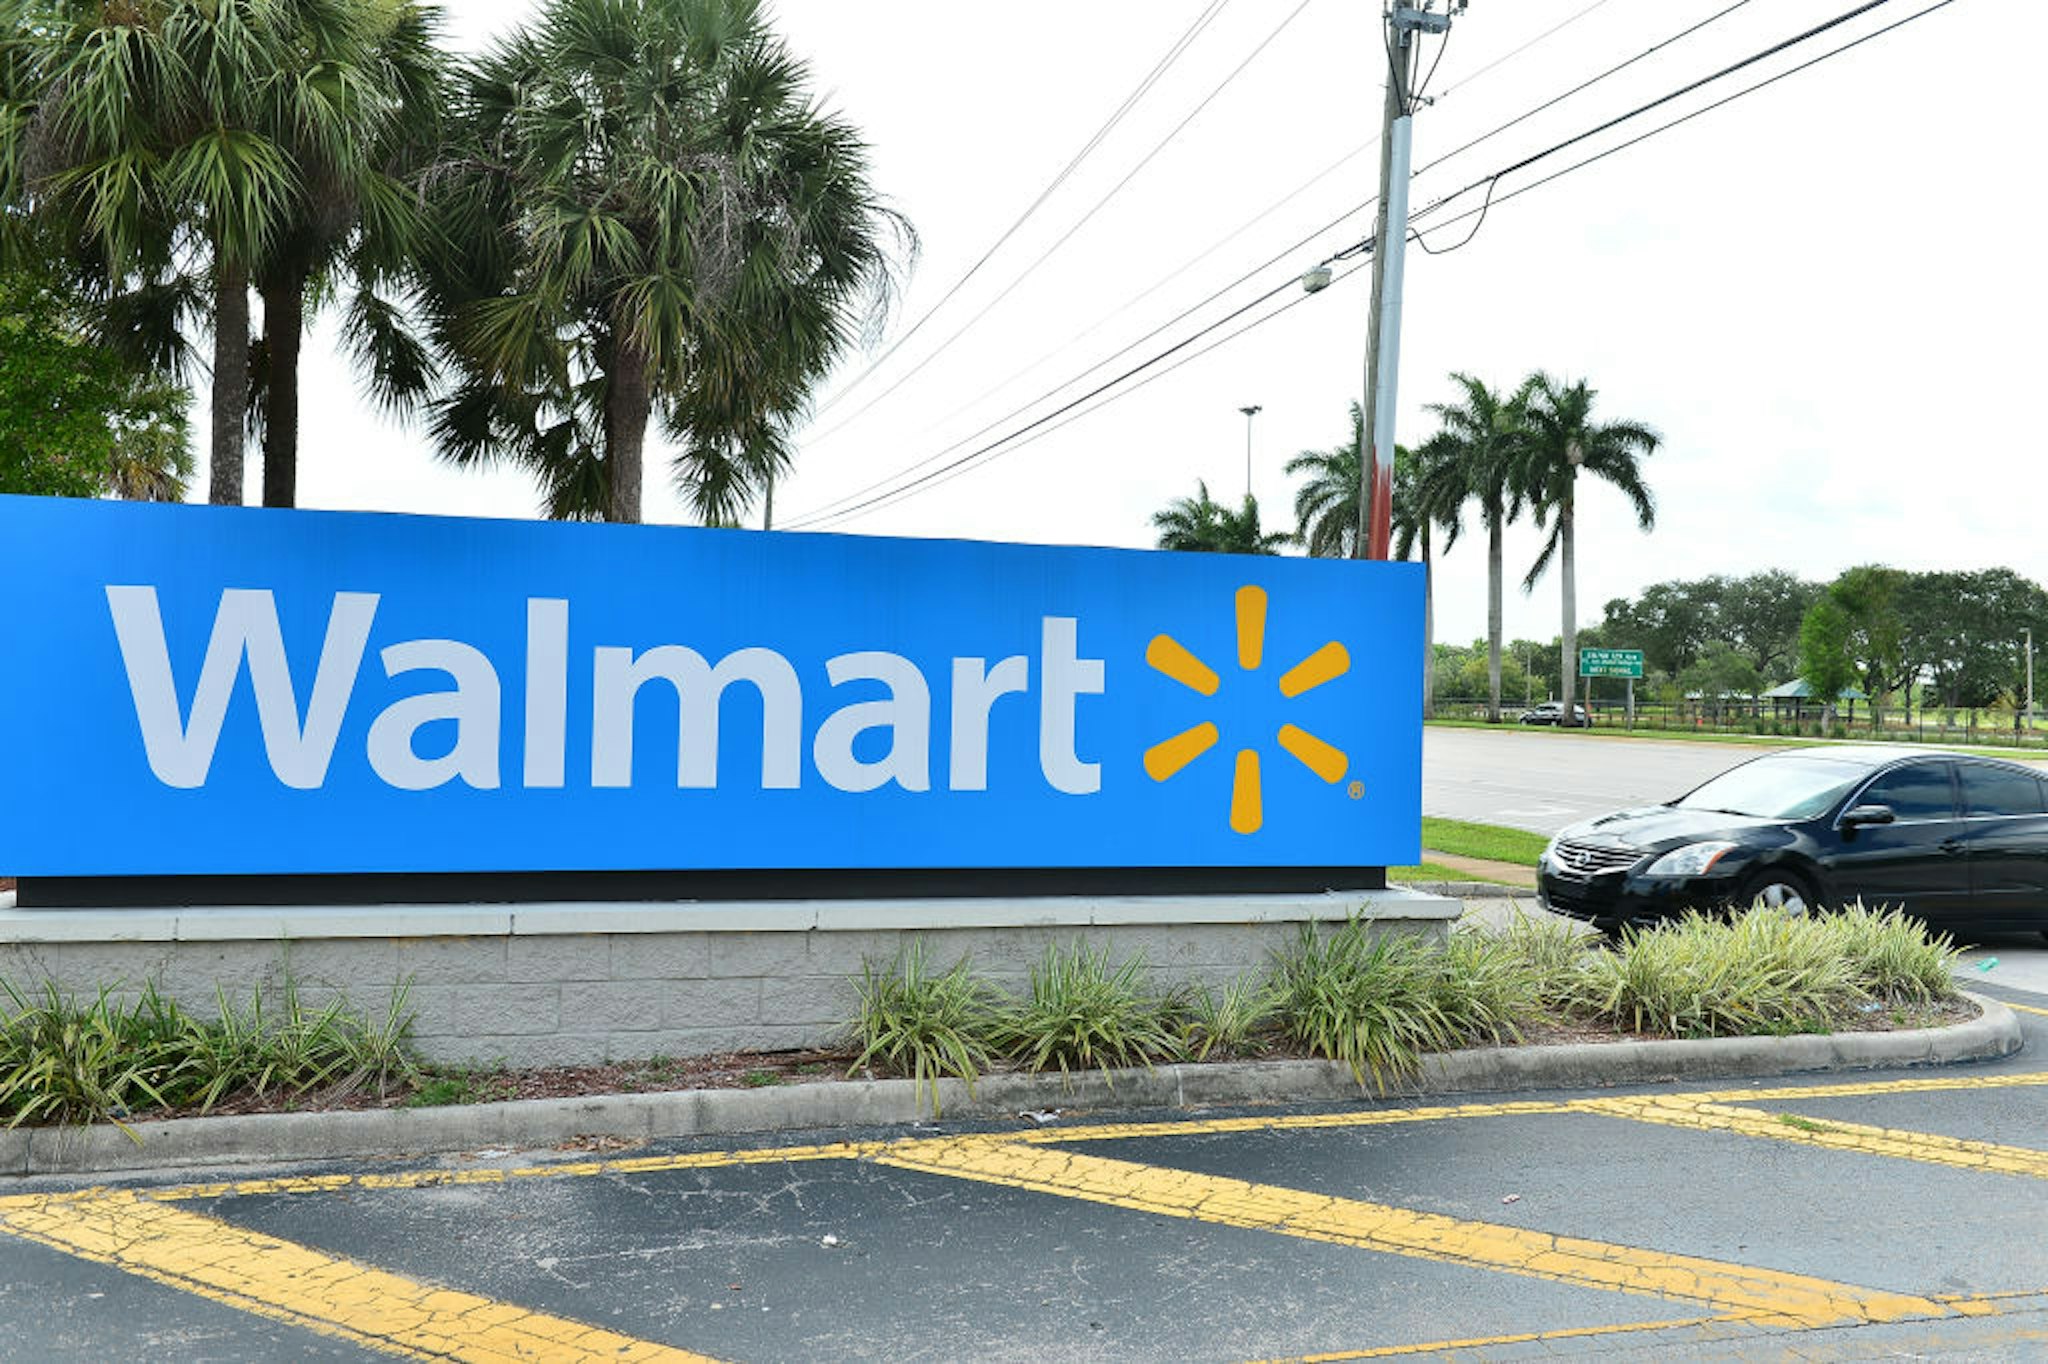 A view outside a Walmart retail store is seen on July 16, 2020 in Pembroke Pines, Florida. Some major U.S. corporations are requiring masks to be worn in their stores upon entering to control the spread of COVID-19.